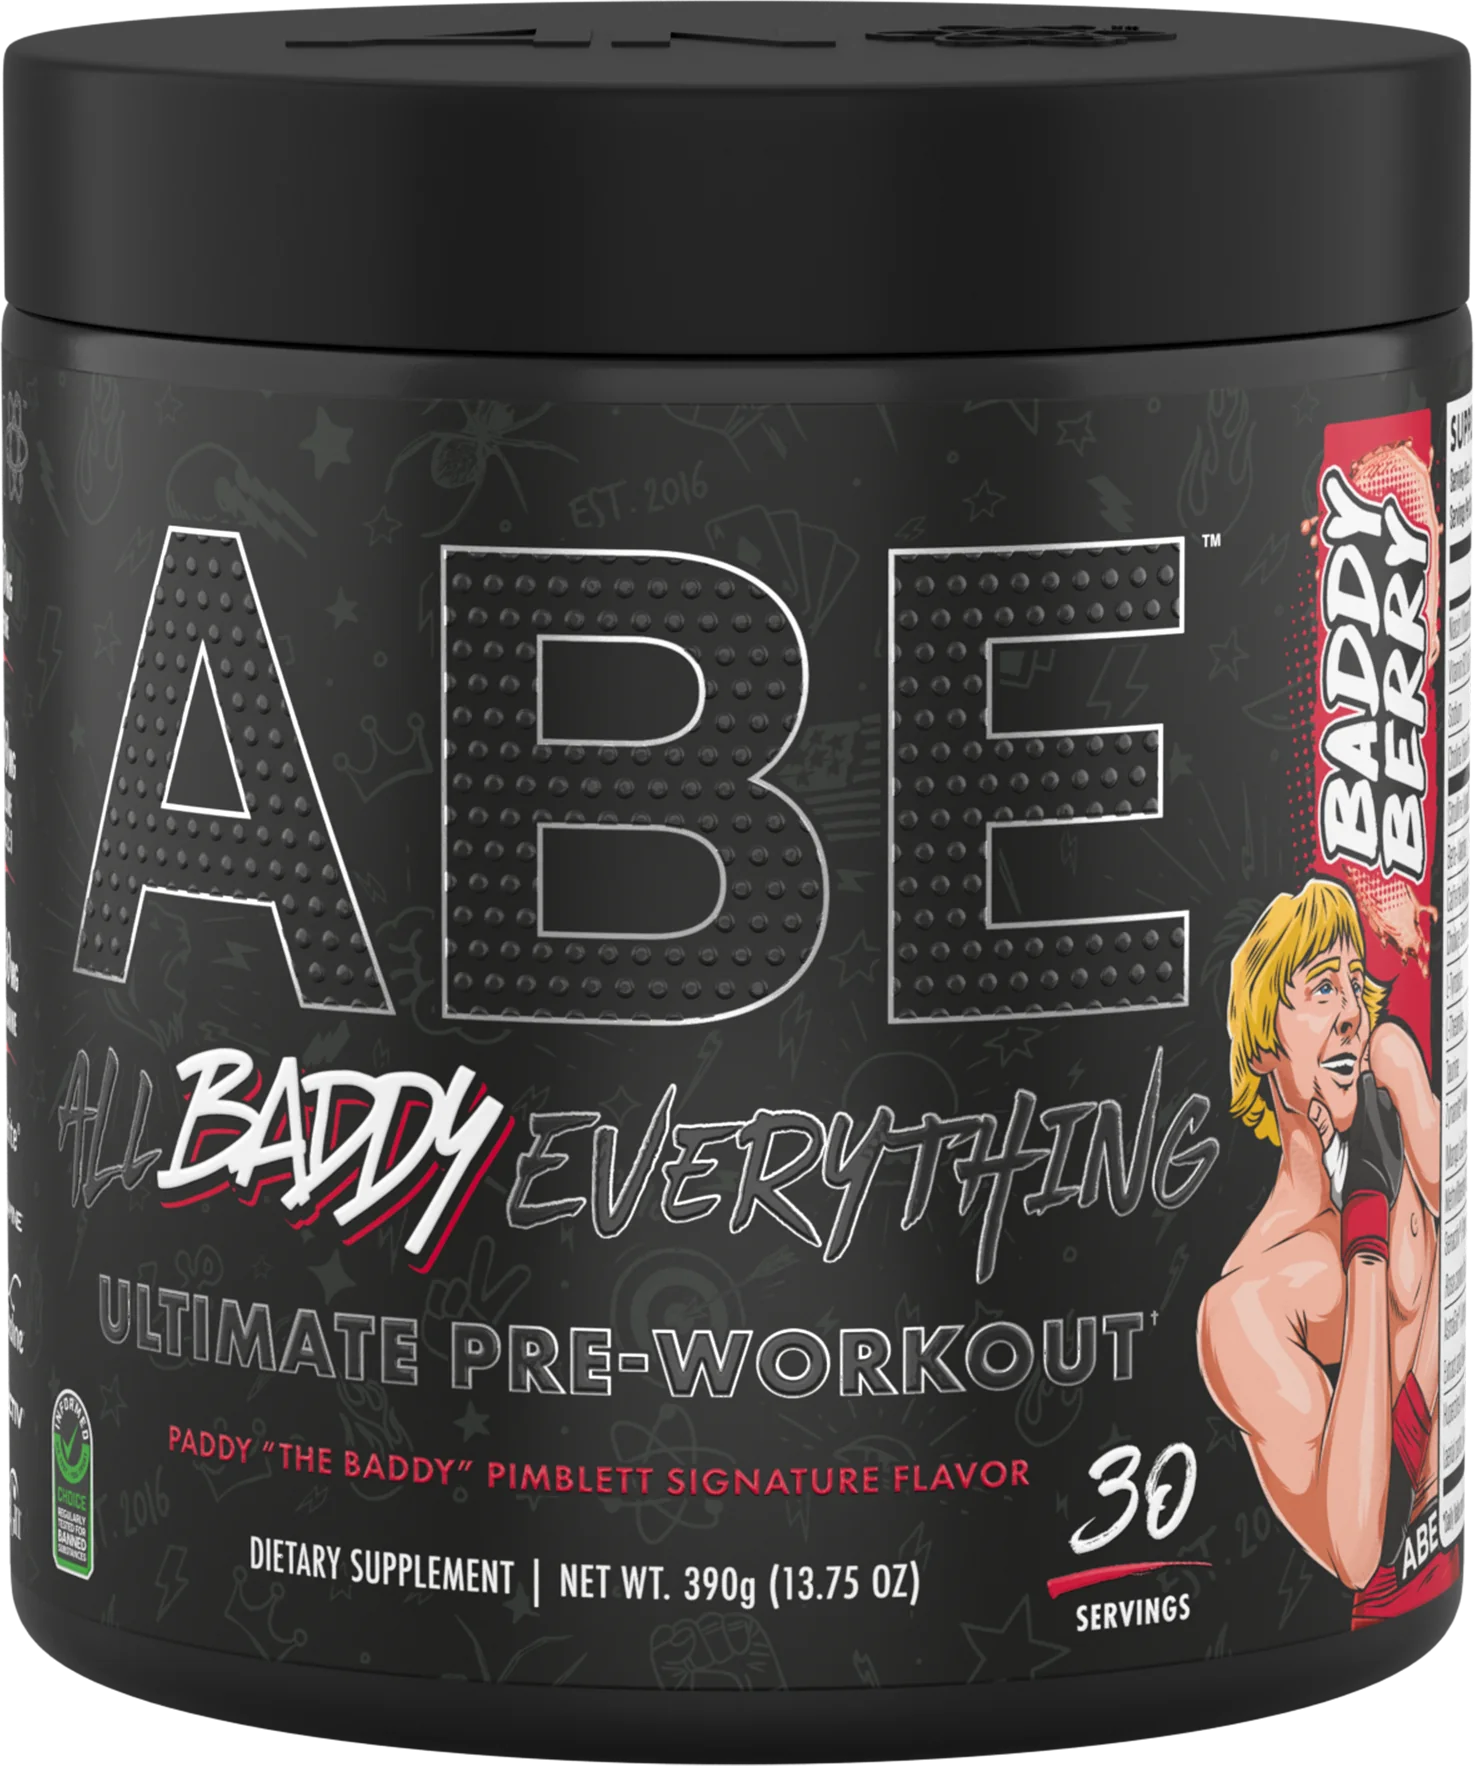 ABE All Black Everything Ultimate Pre-Workout front bottle